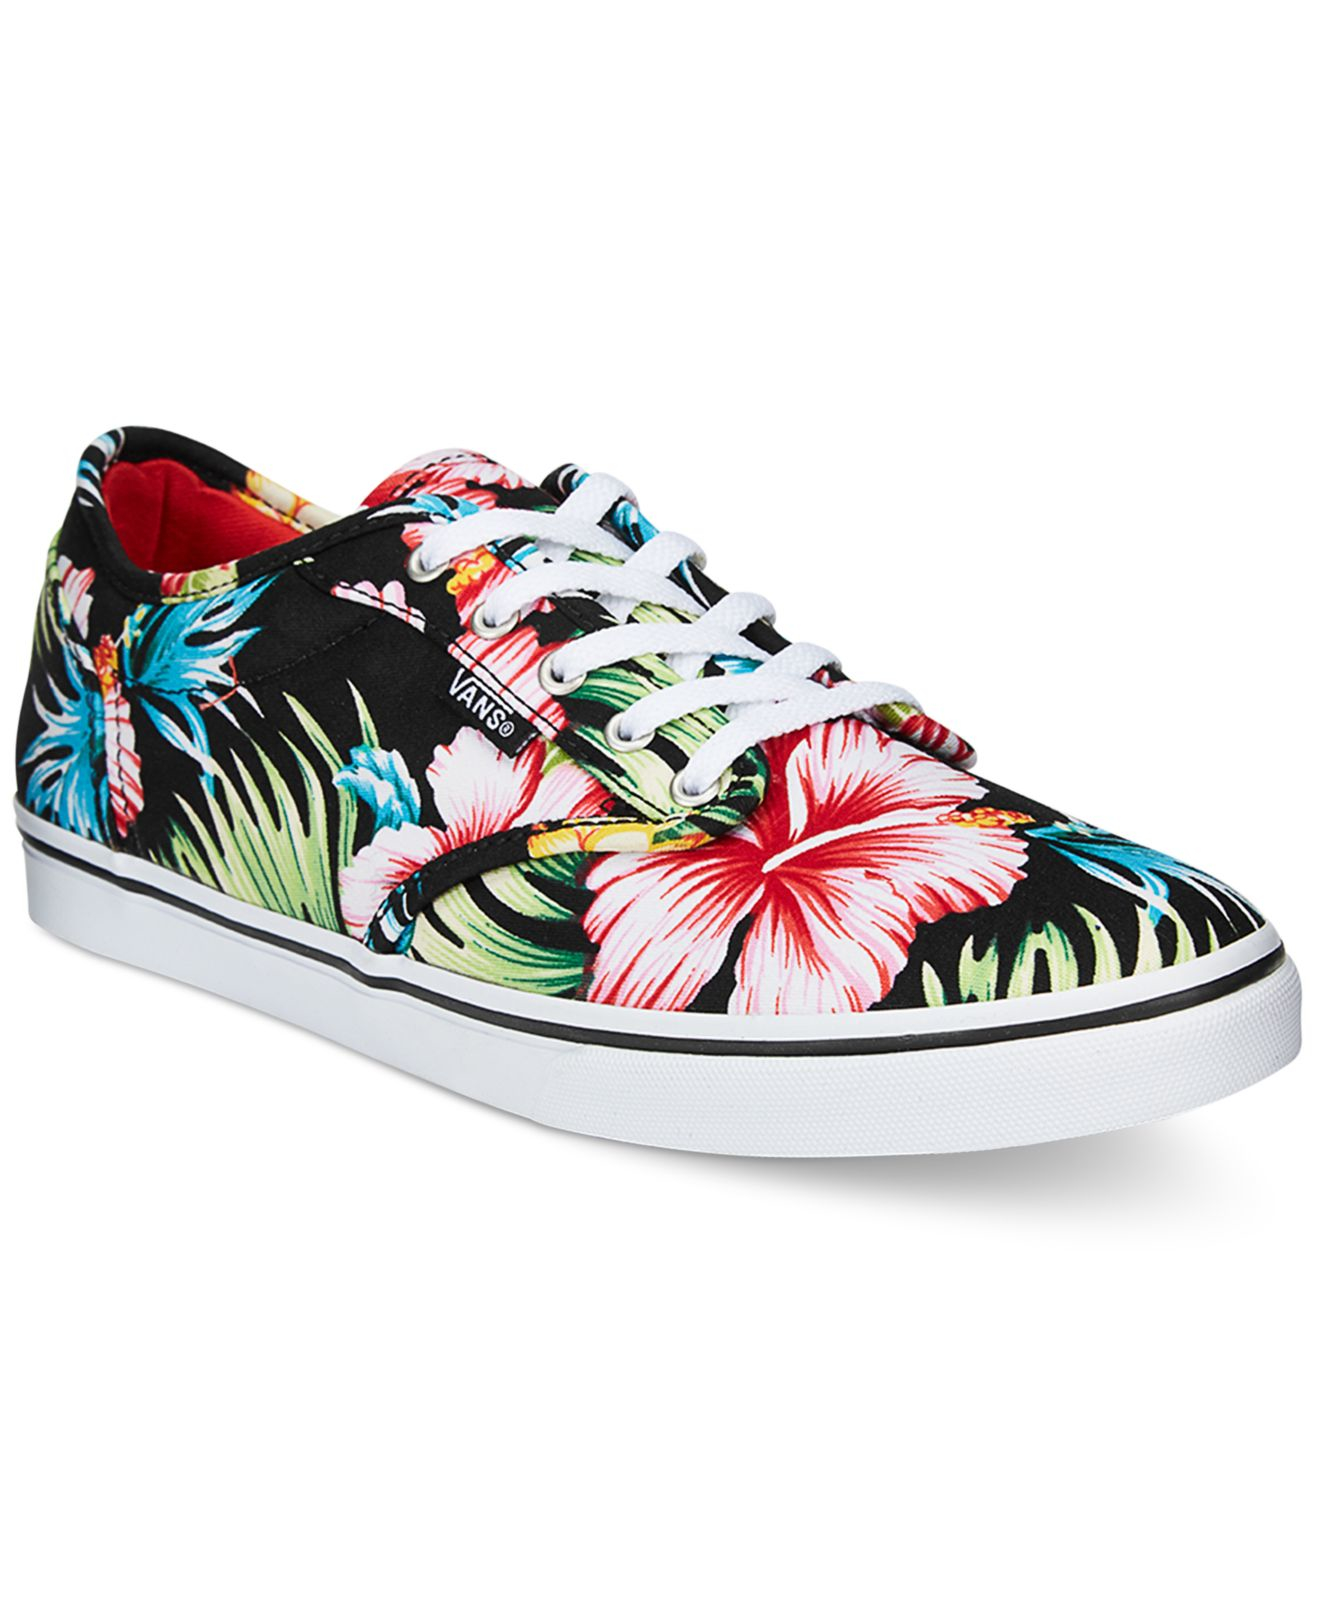 Lyst - Vans Women's Atwood Low Aloha Lace-up Sneakers in Black